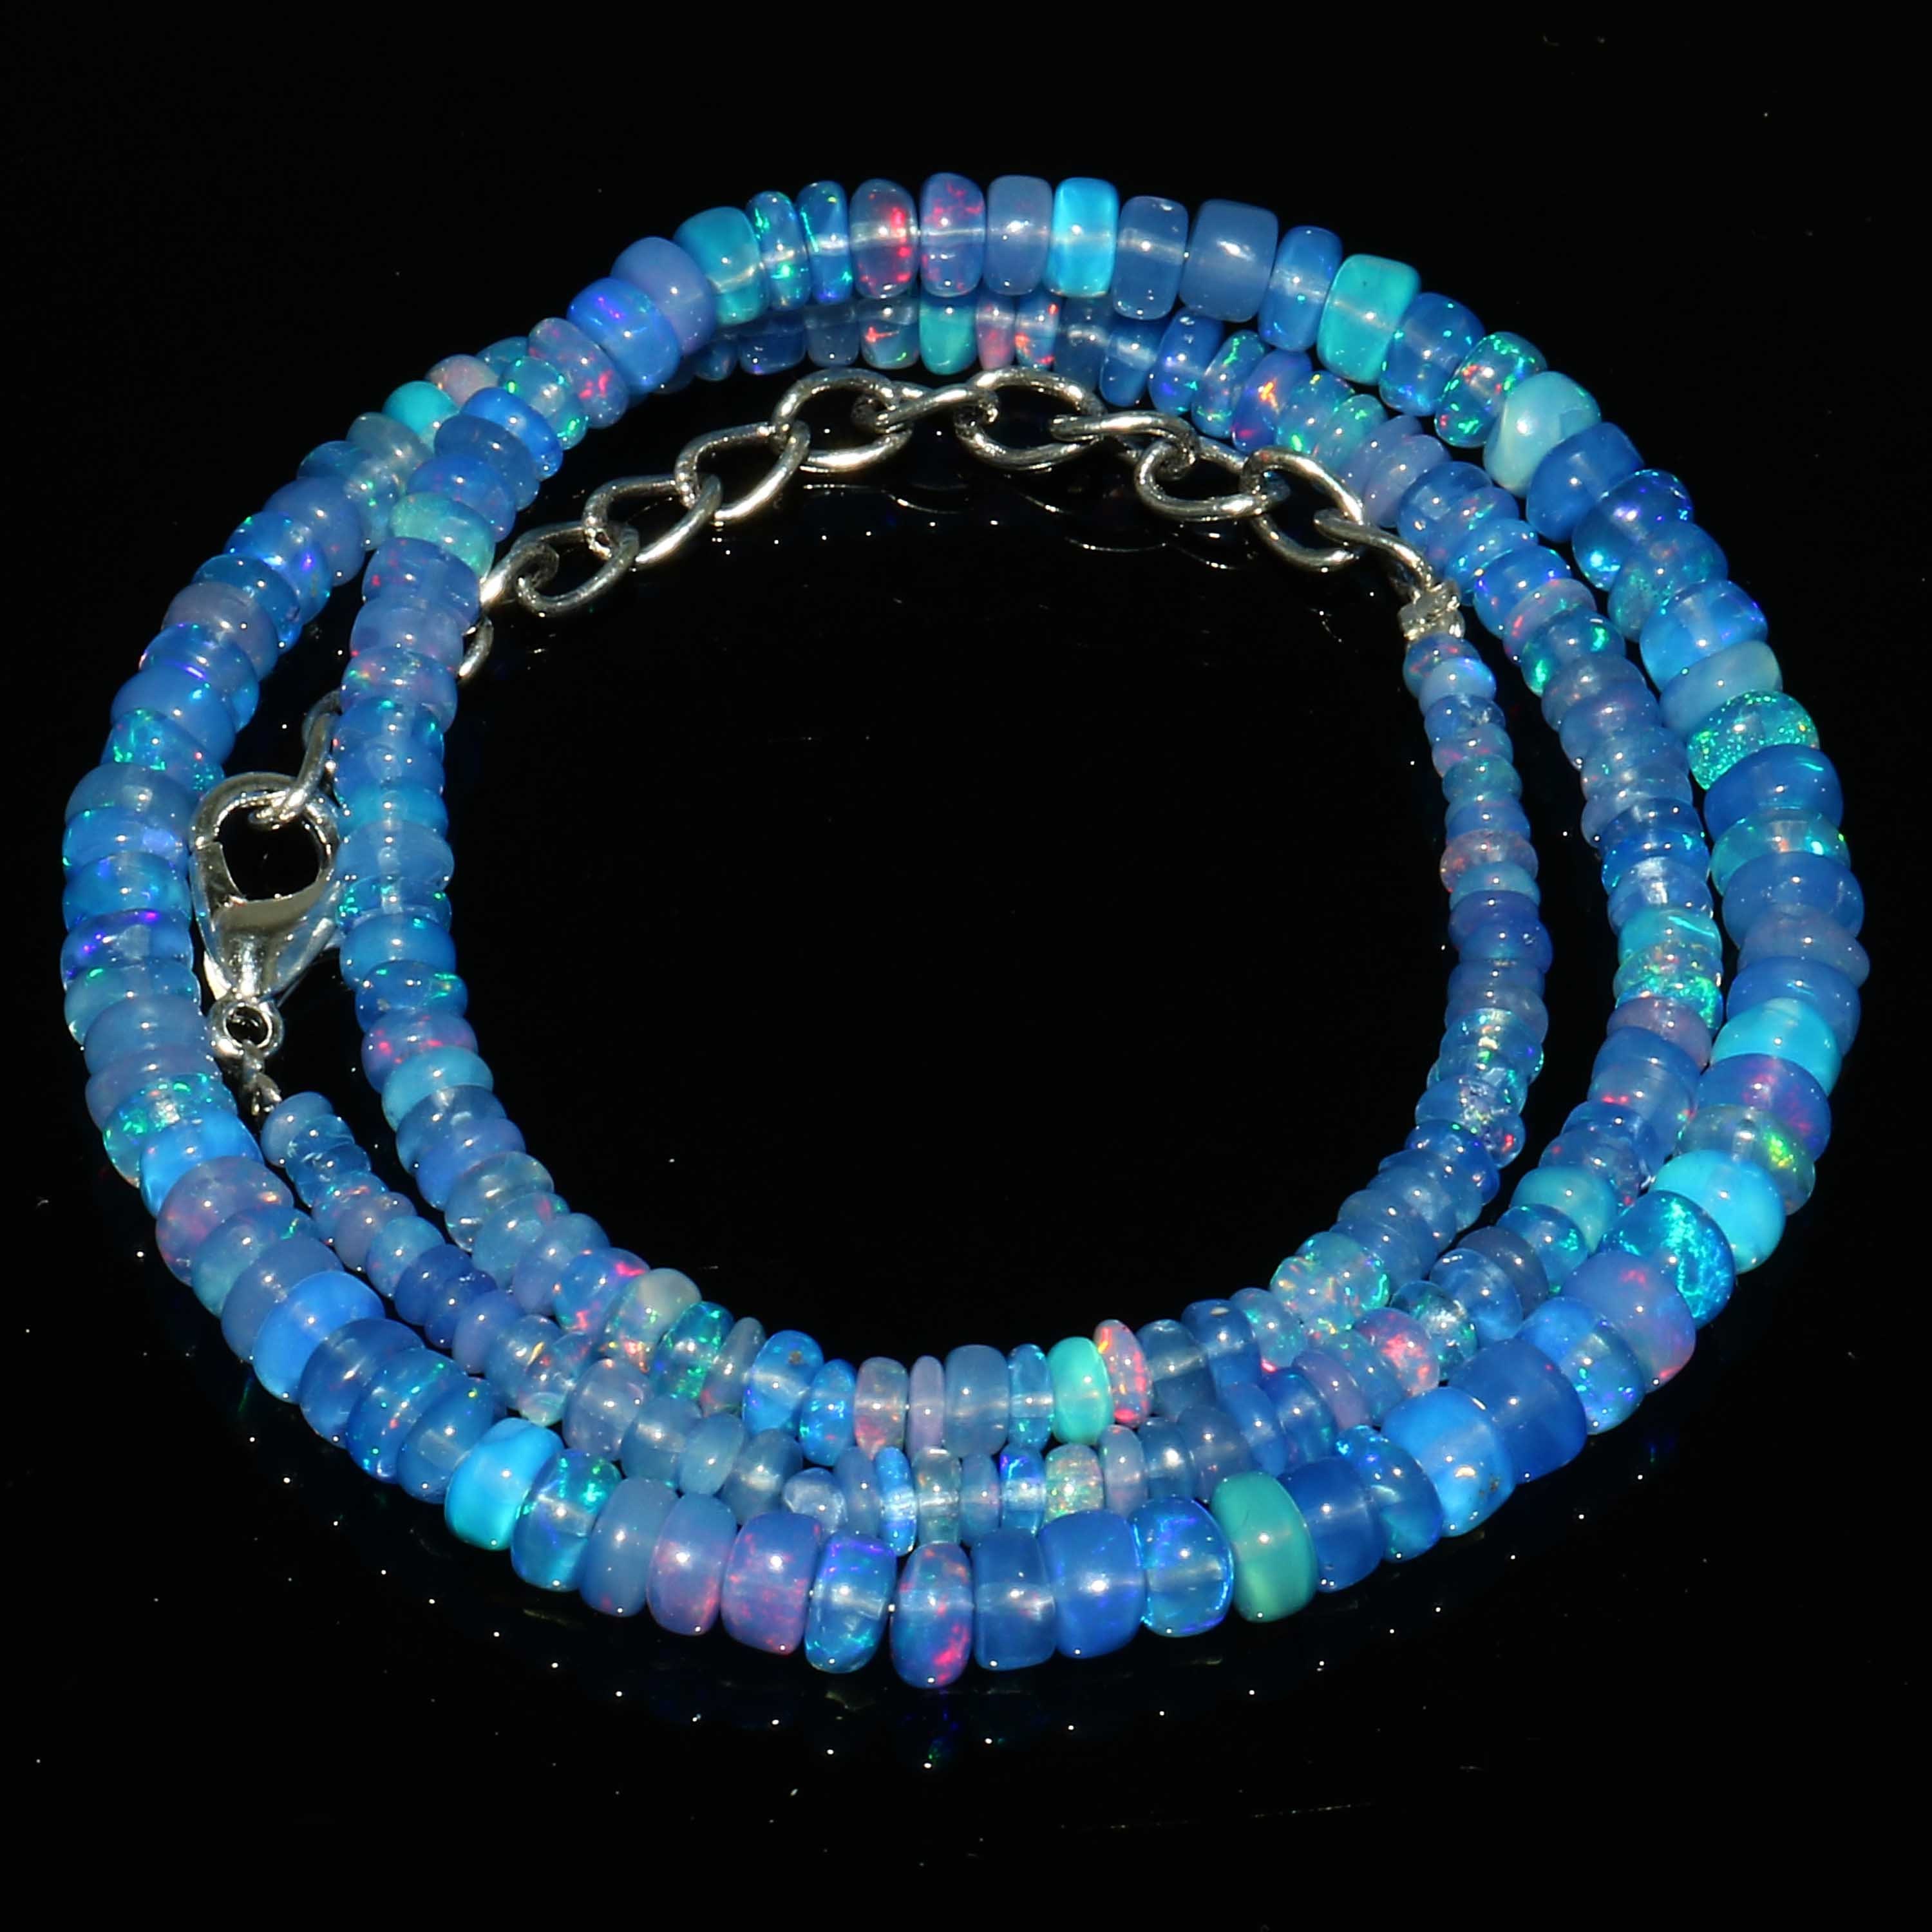 8mm Denim Blue Opal Faceted Rondelle Beads 8 inch 38 pcs – The Bead Traders